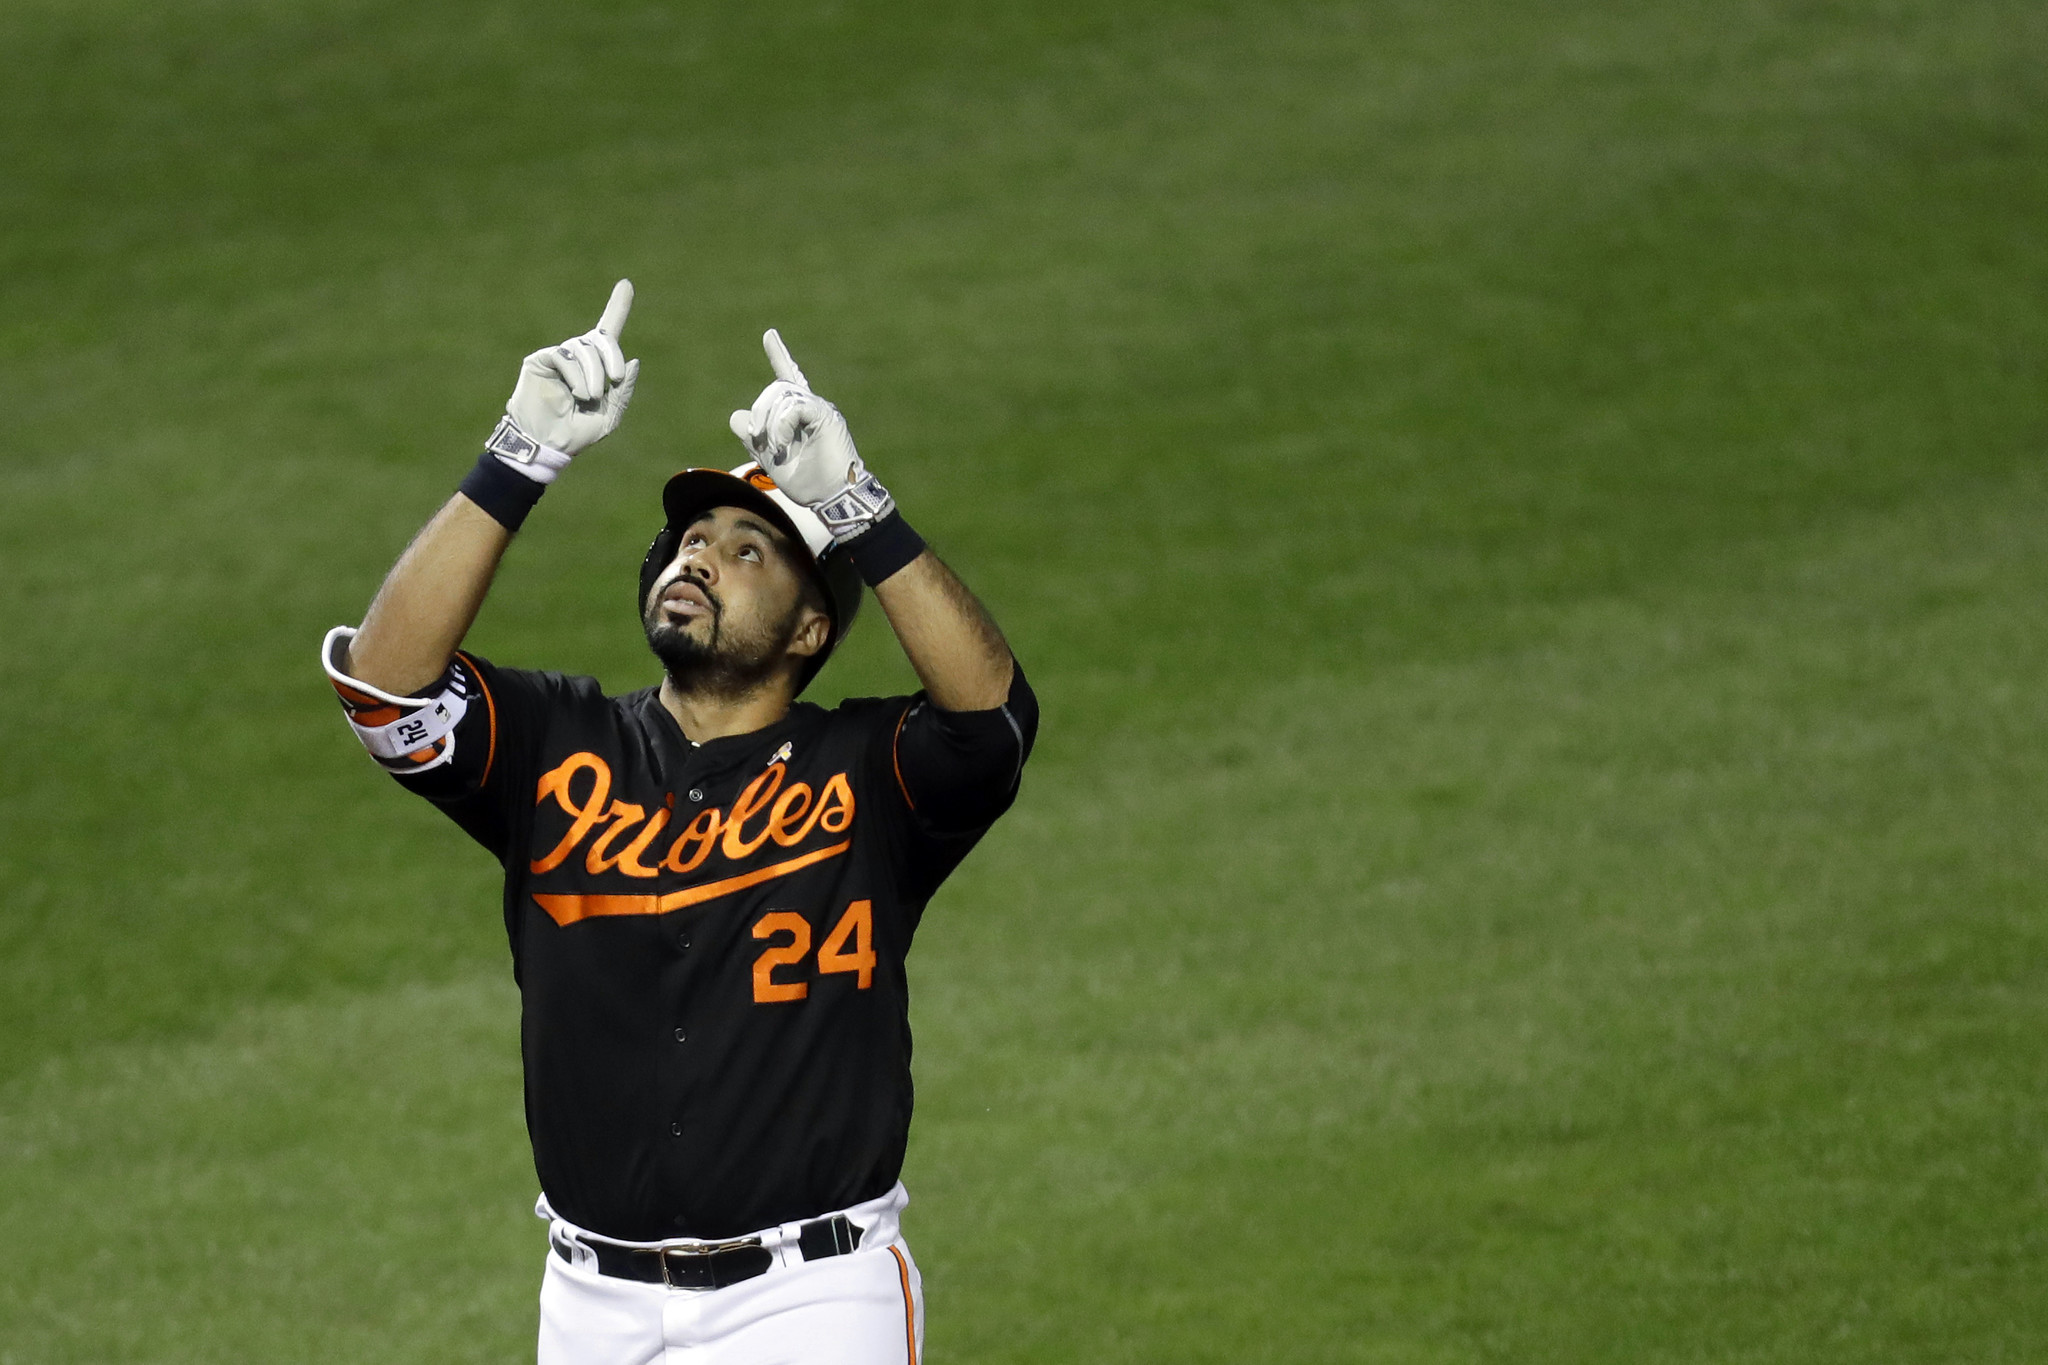 Pedro Alvarez has the bat to play in Orioles outfield, but what about the defense?